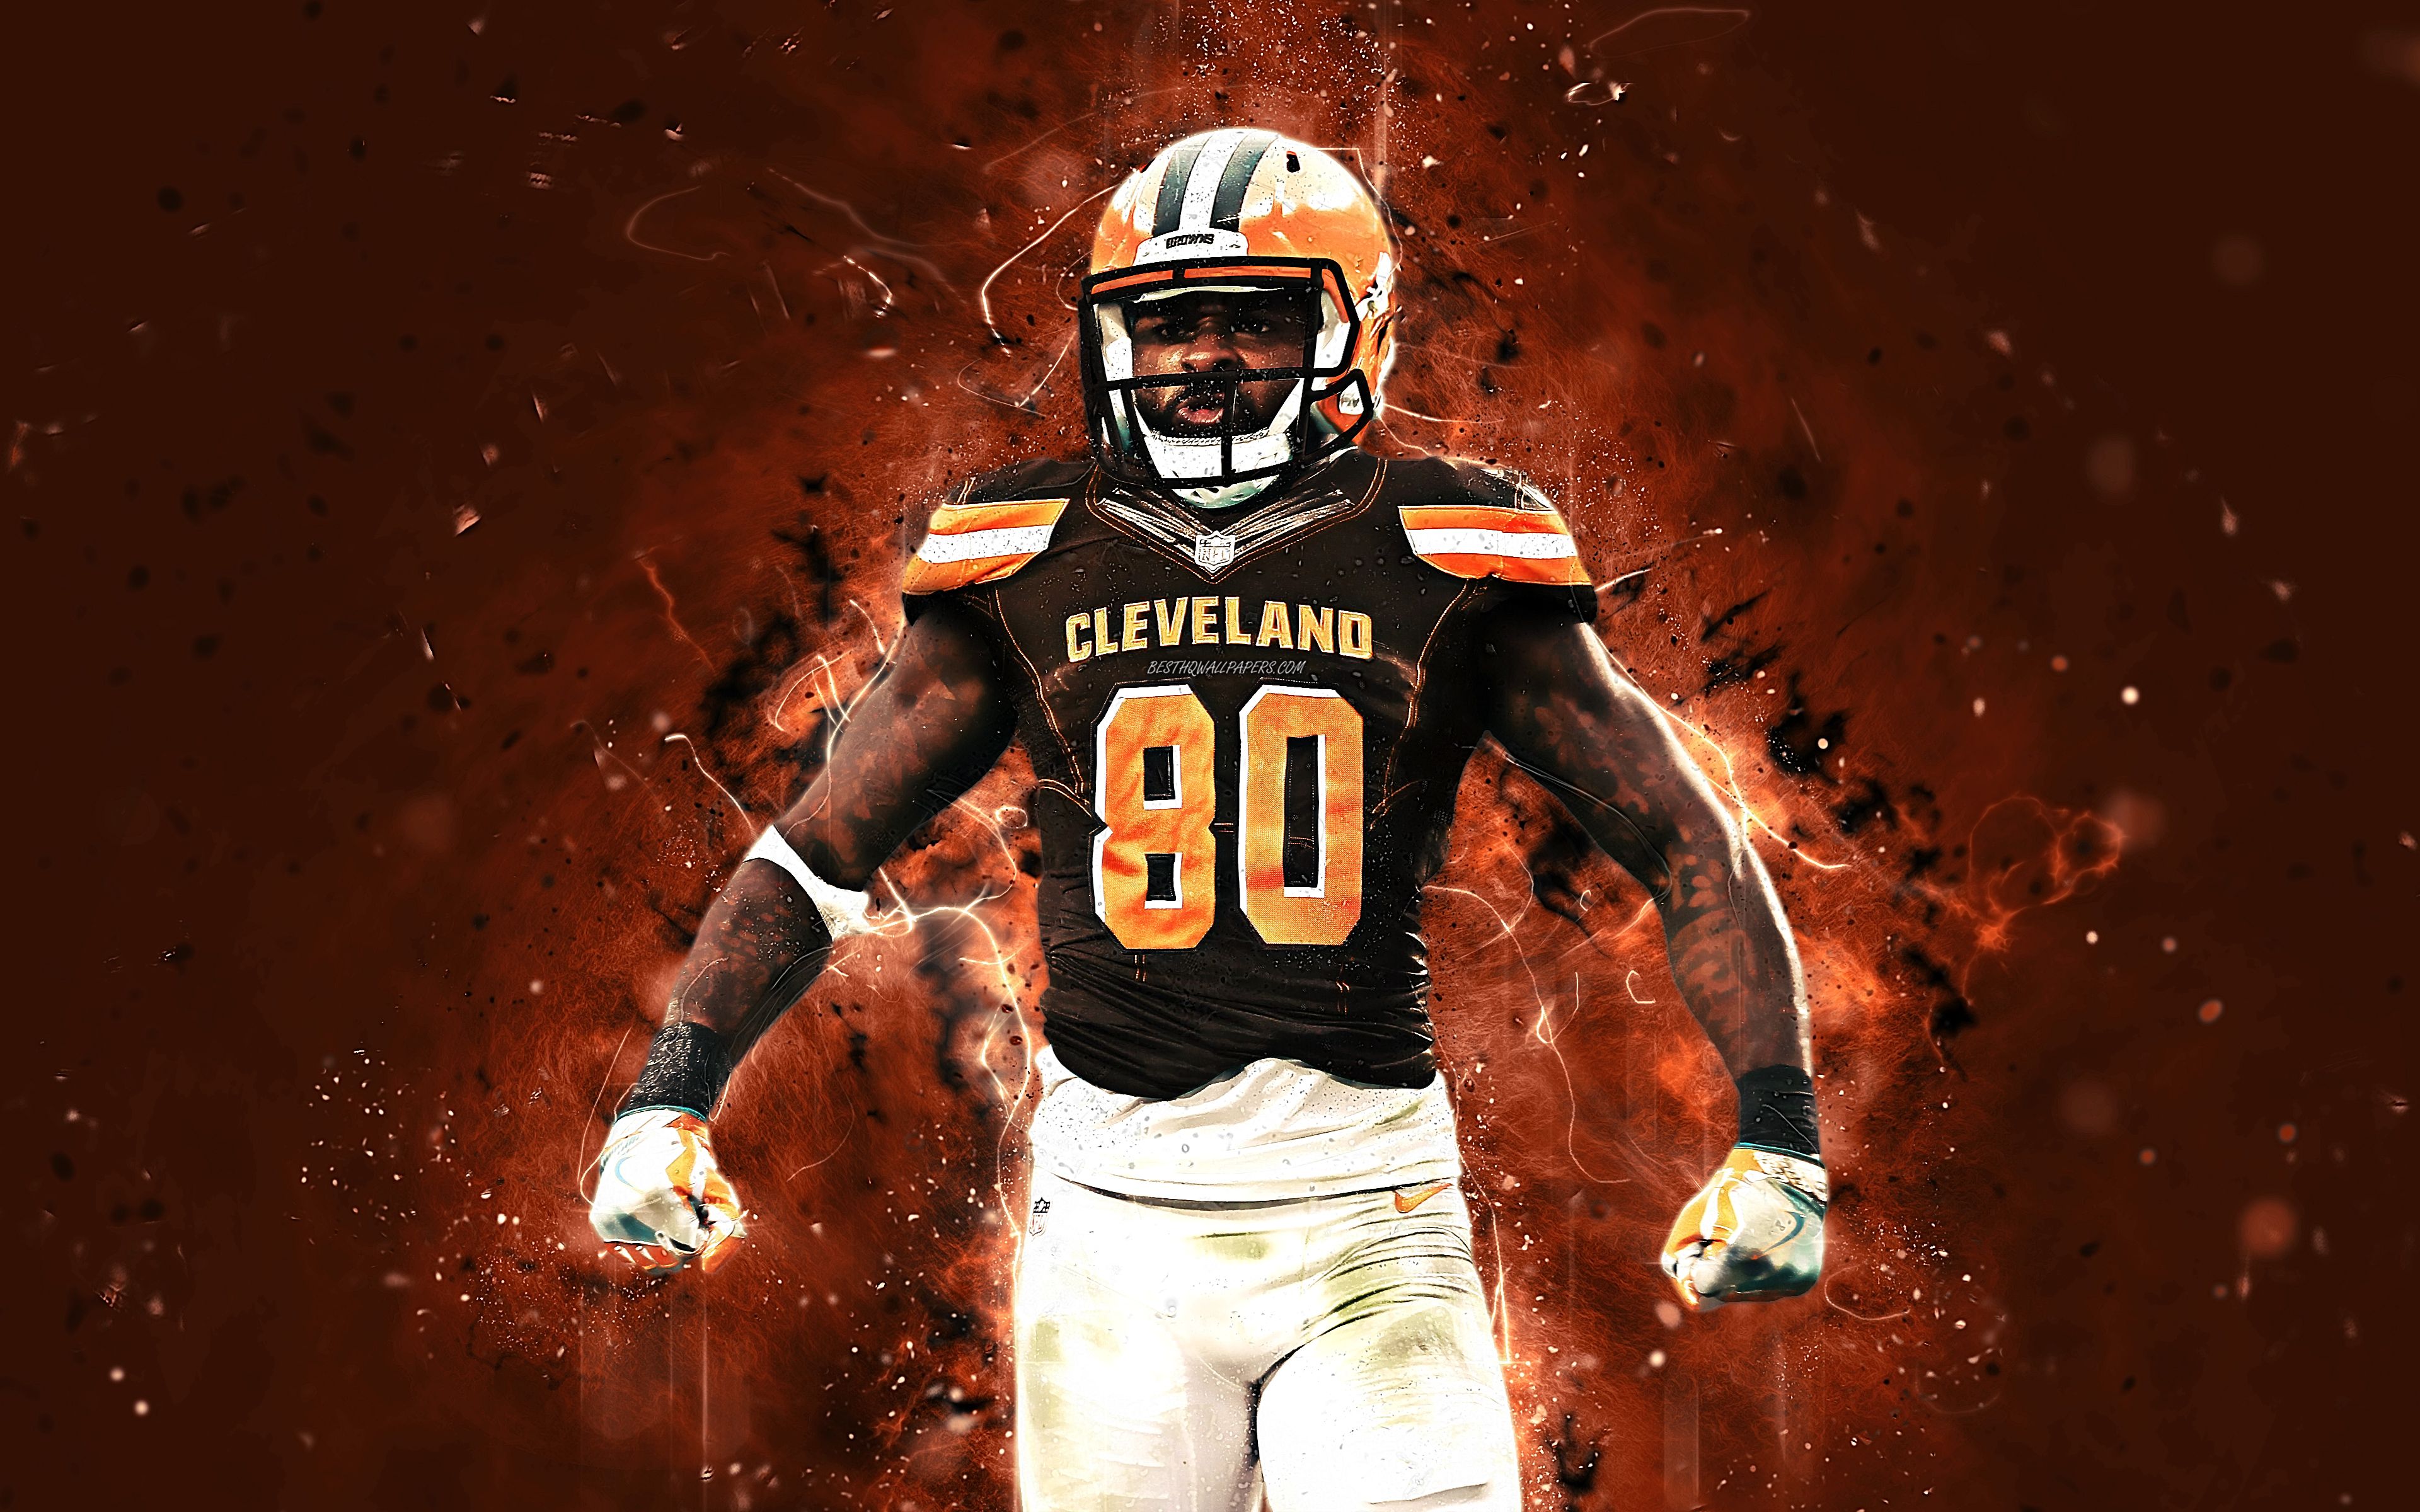 jarvis landry national football league player 4k 1629408276 - Jarvis Landry National Football League Player 4k - Jarvis Landry National Football League Player wallpapers, Jarvis Landry National Football League Player 4k wallpapers